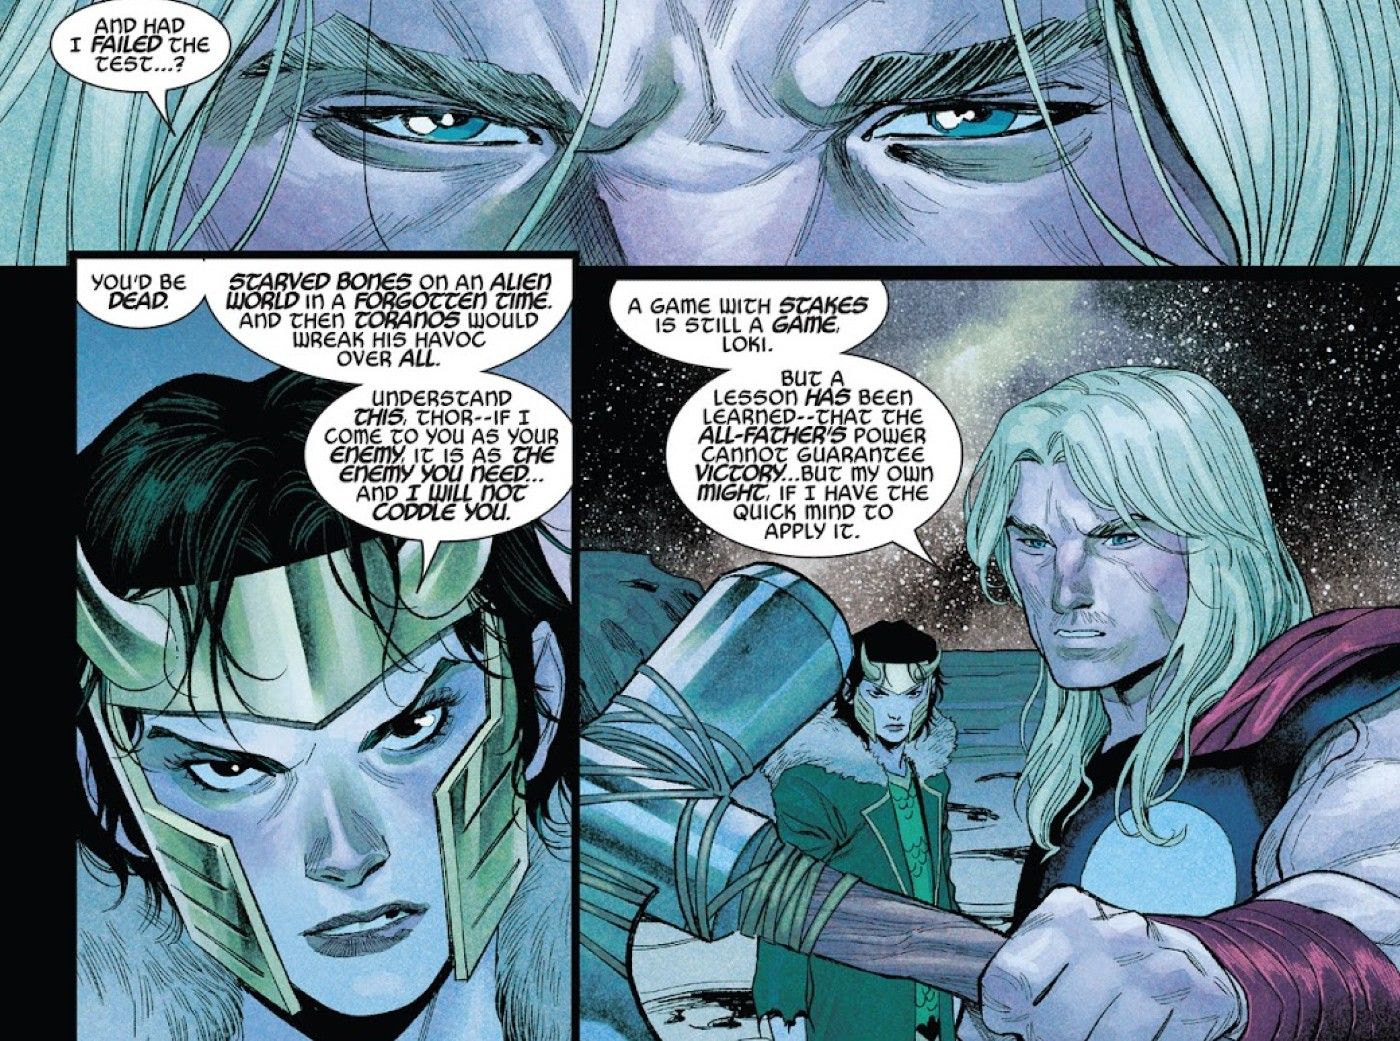 he Immortal Thor #3, Loki is the enemy Thor needs to help him defeat a much greater threat